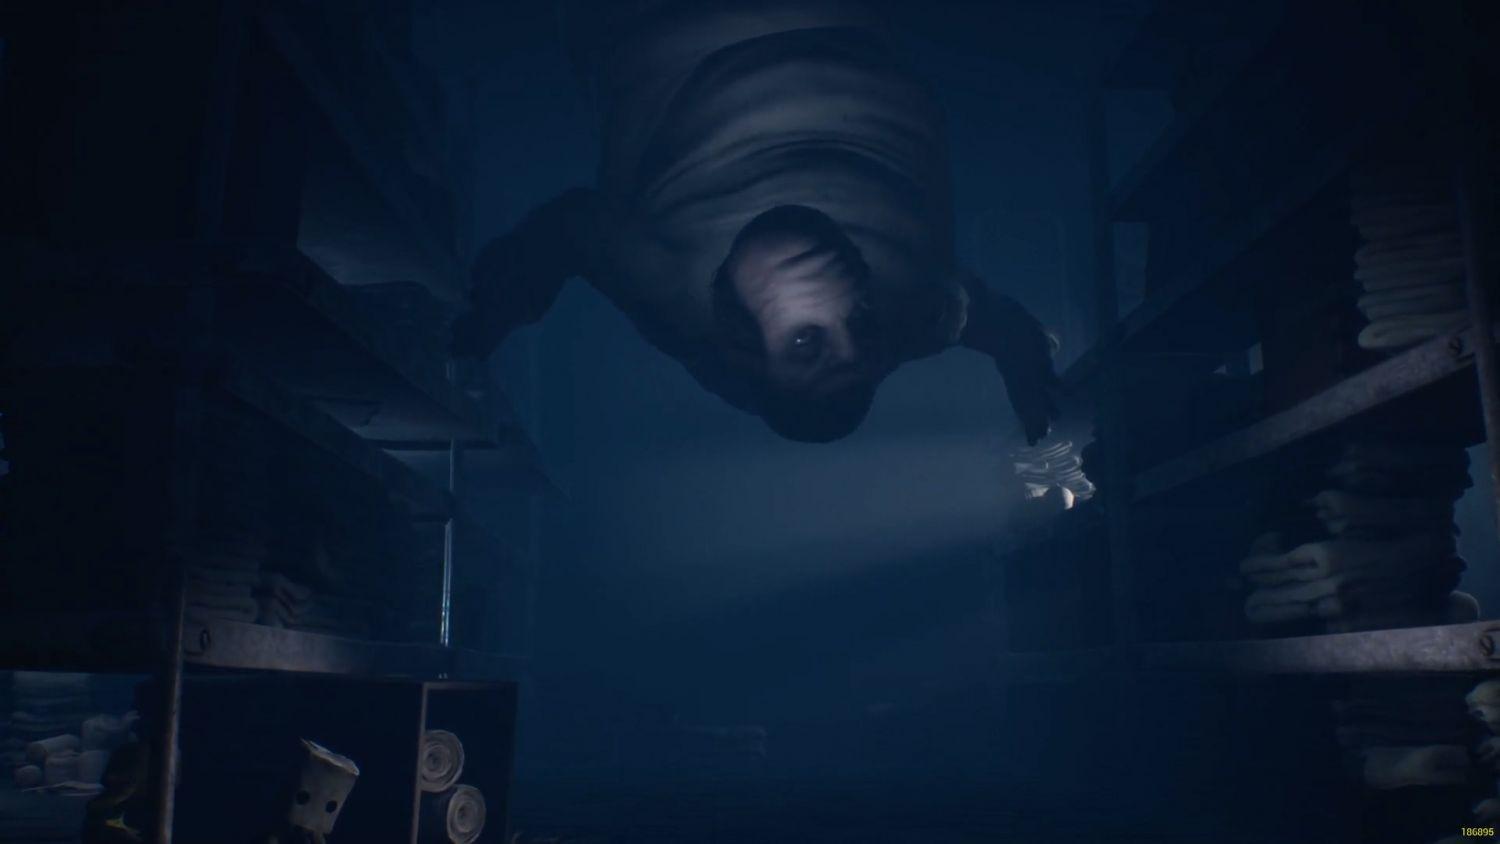 Little Nightmares II: Guide to All Boss Encounters | Guides & News